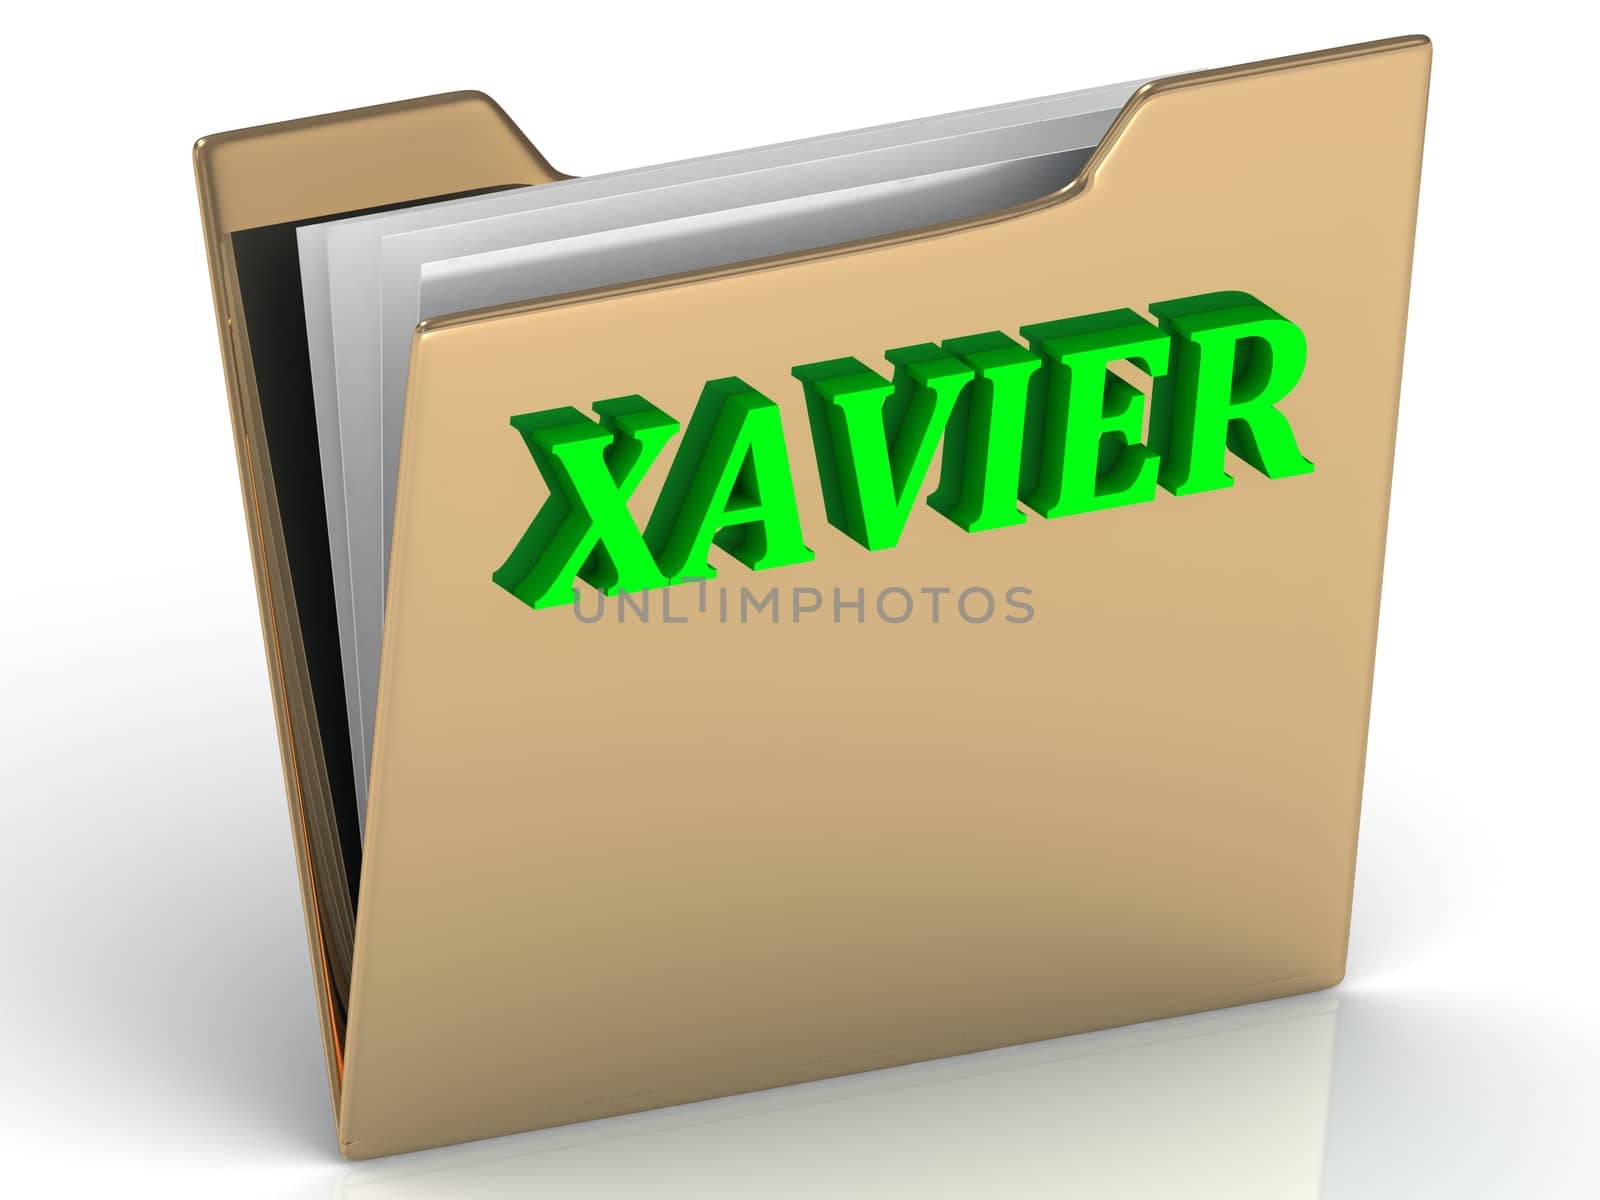 XAVIER- bright green letters on gold paperwork folder by GreenMost